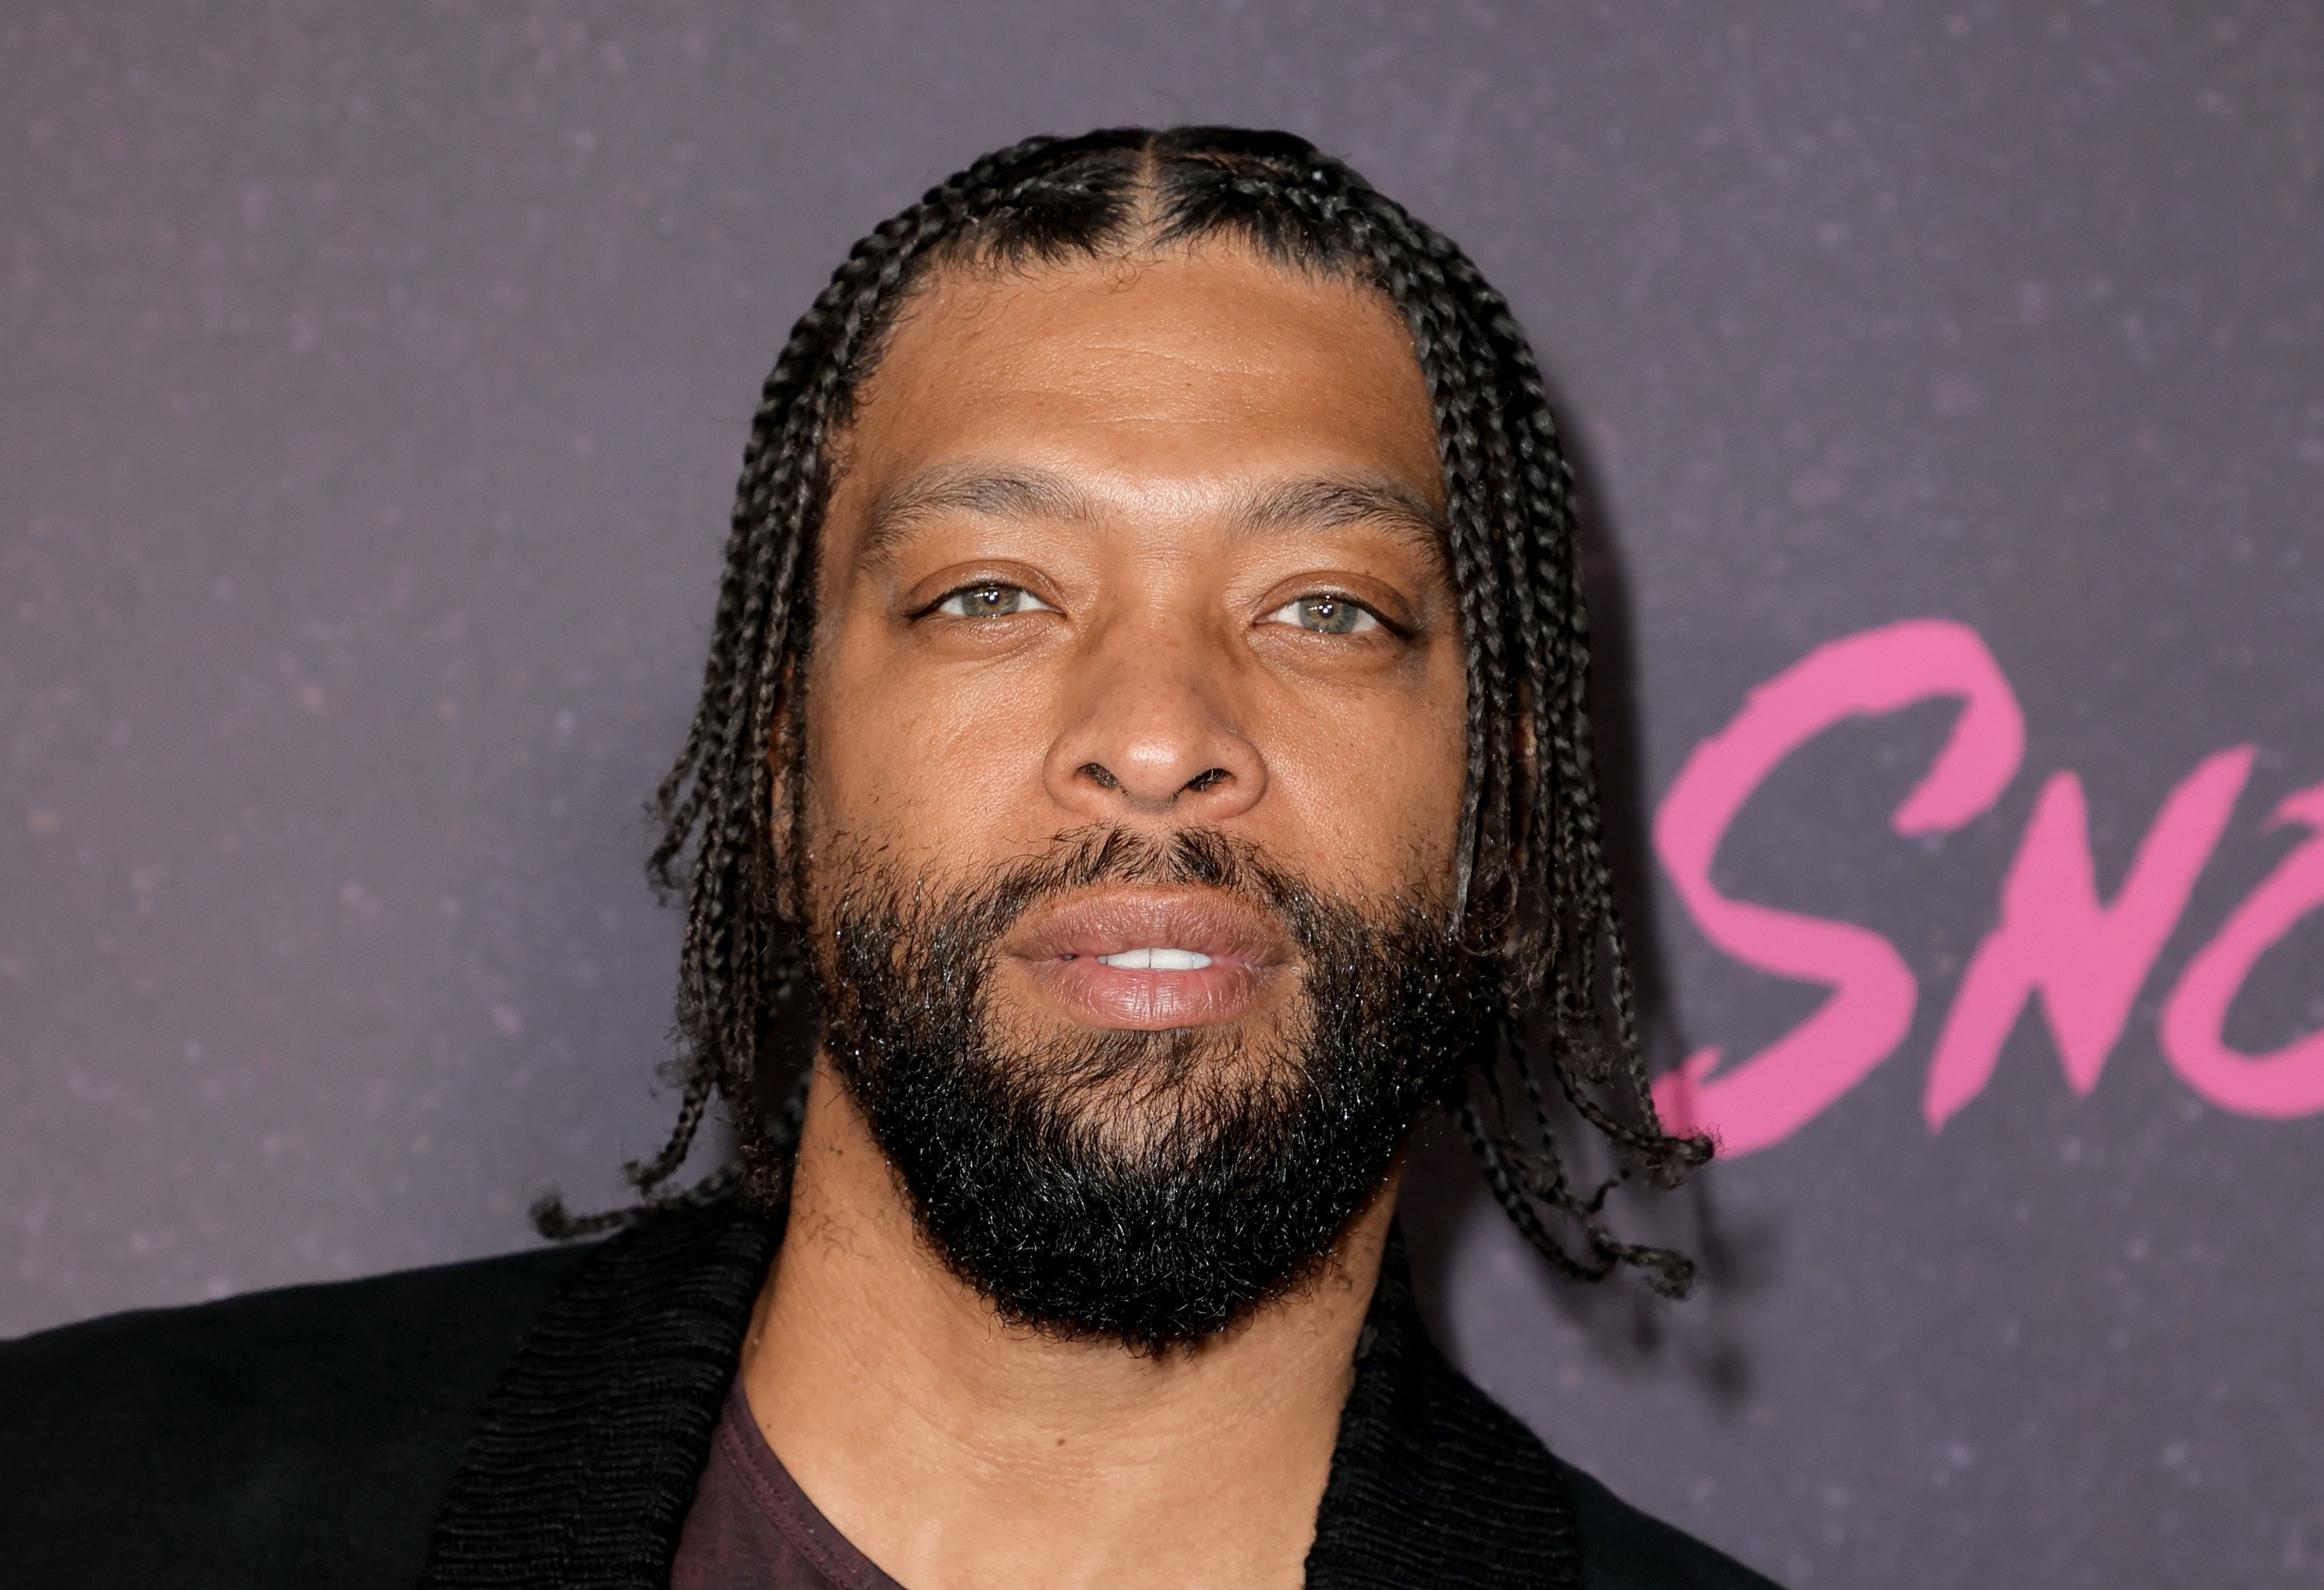 DeRay Davis poses with a straight face on the red carpet at a Snowfall premiere